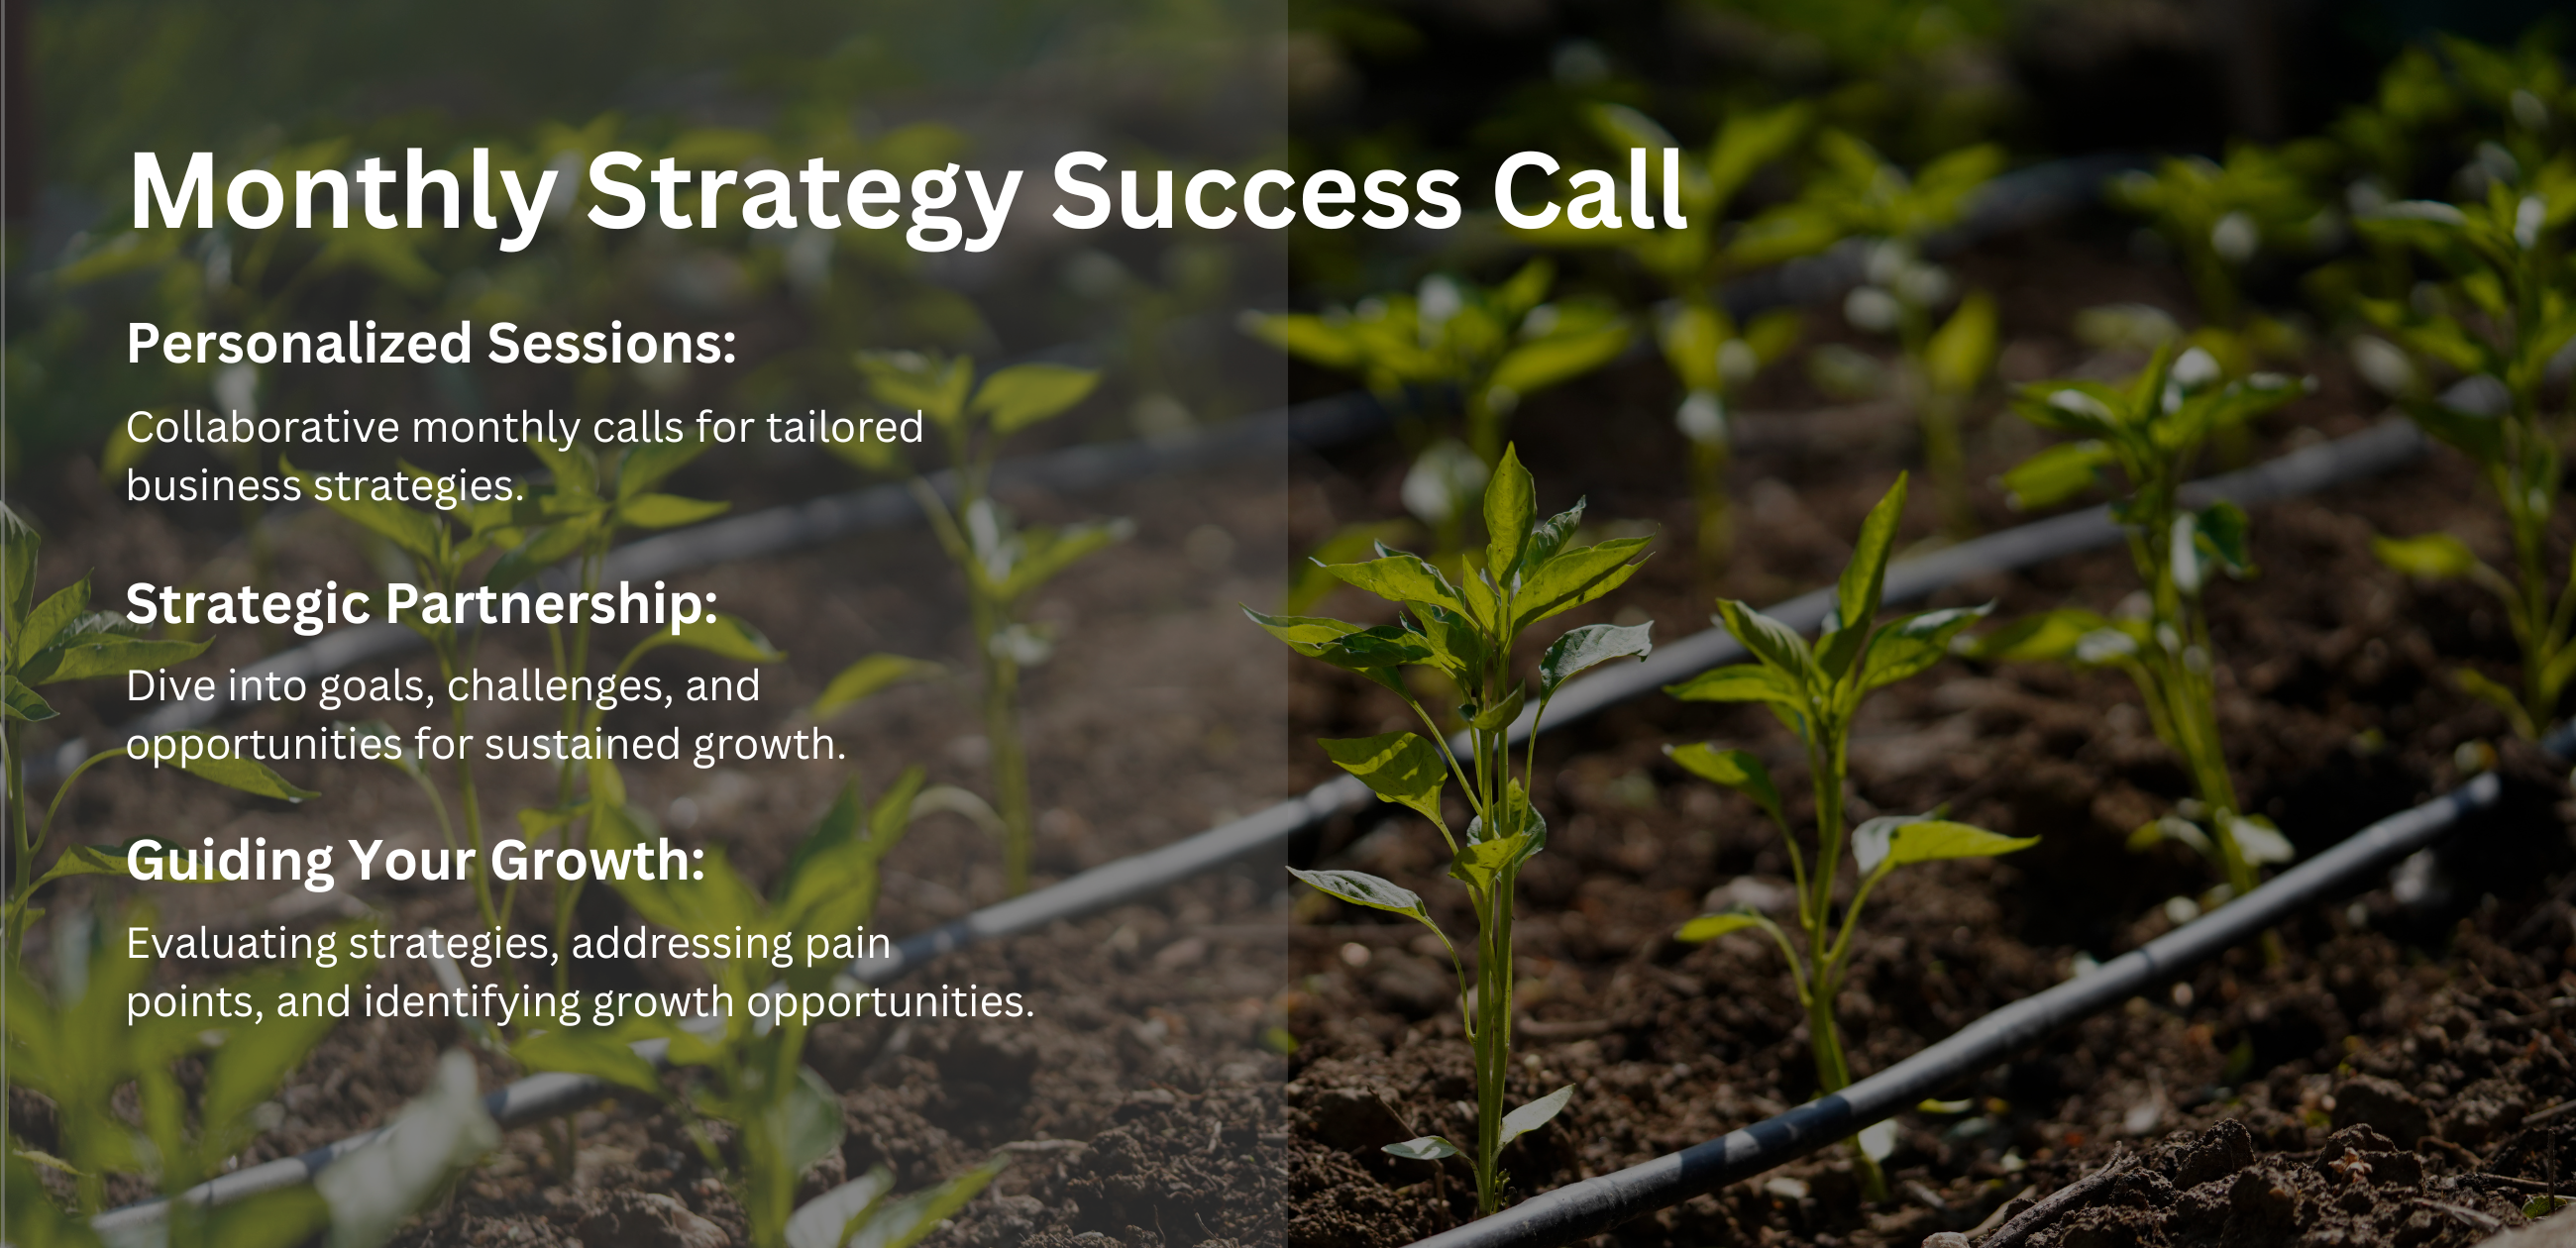 Monthly Strategy Success Call: Your Key to Sustainable Growth